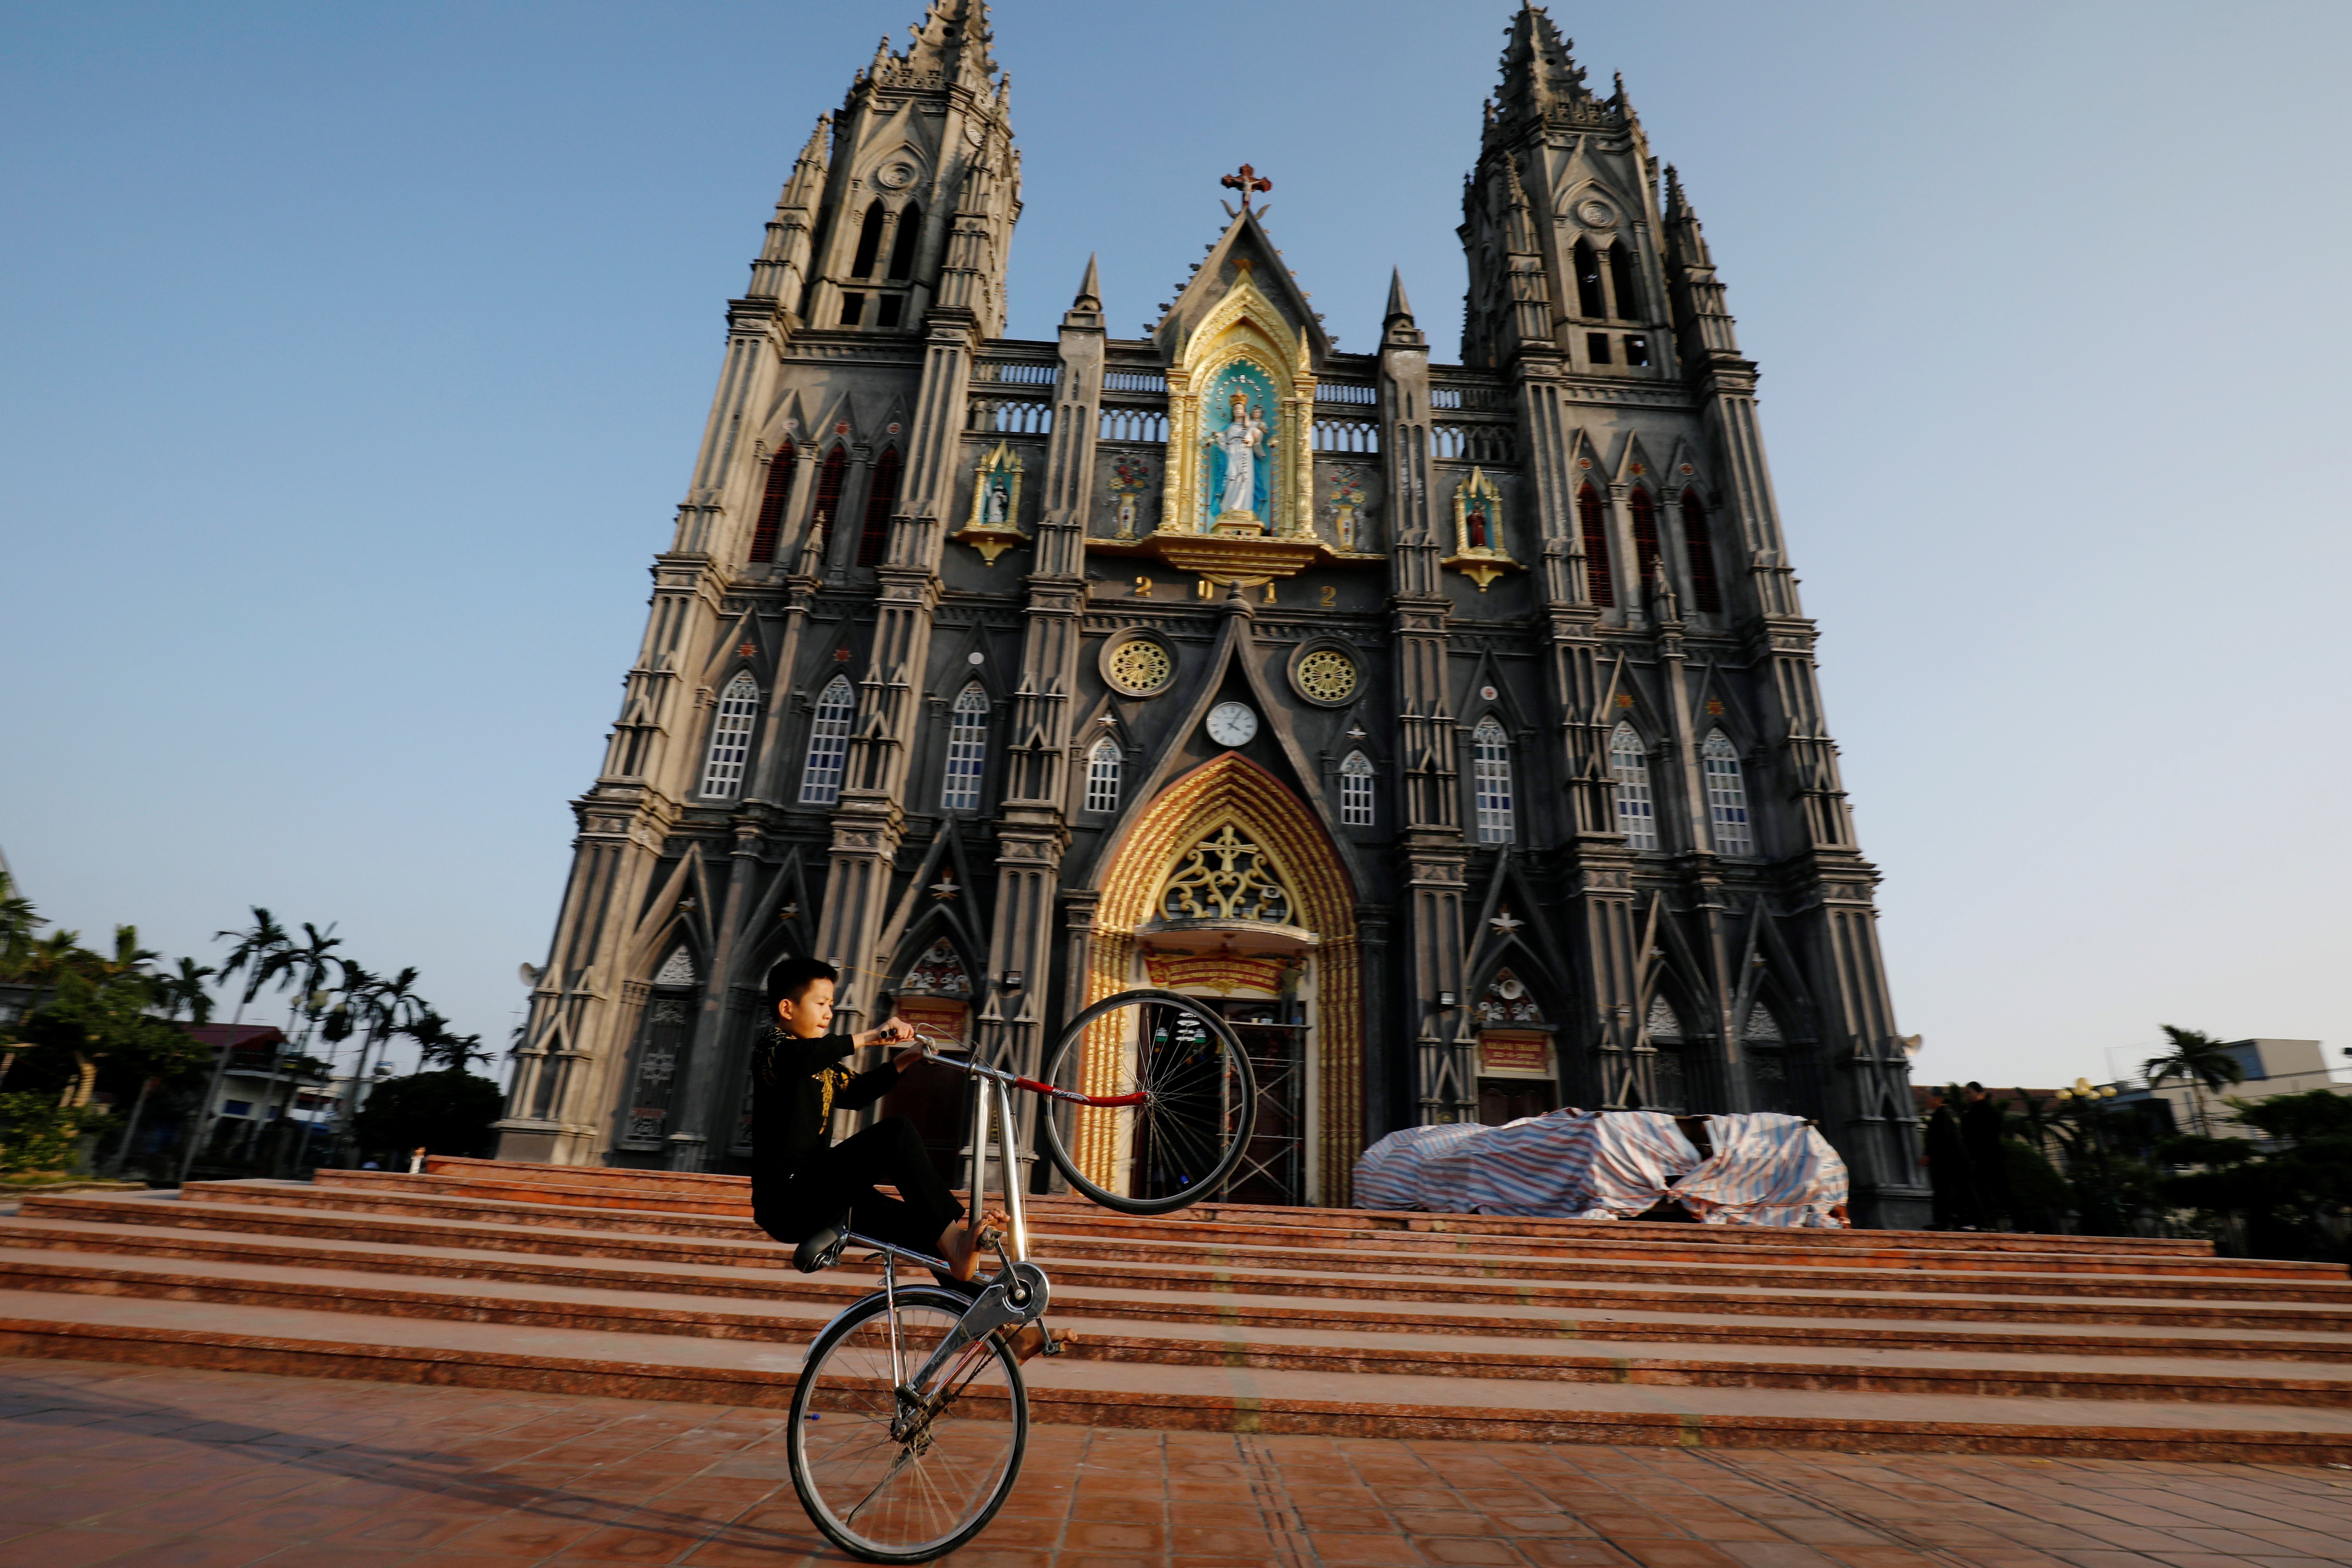 A boy in Nam Dinh, Vietnam, cycles in front of a church Dec. 6, 2020. (CNS photo/Kham, Reuters)